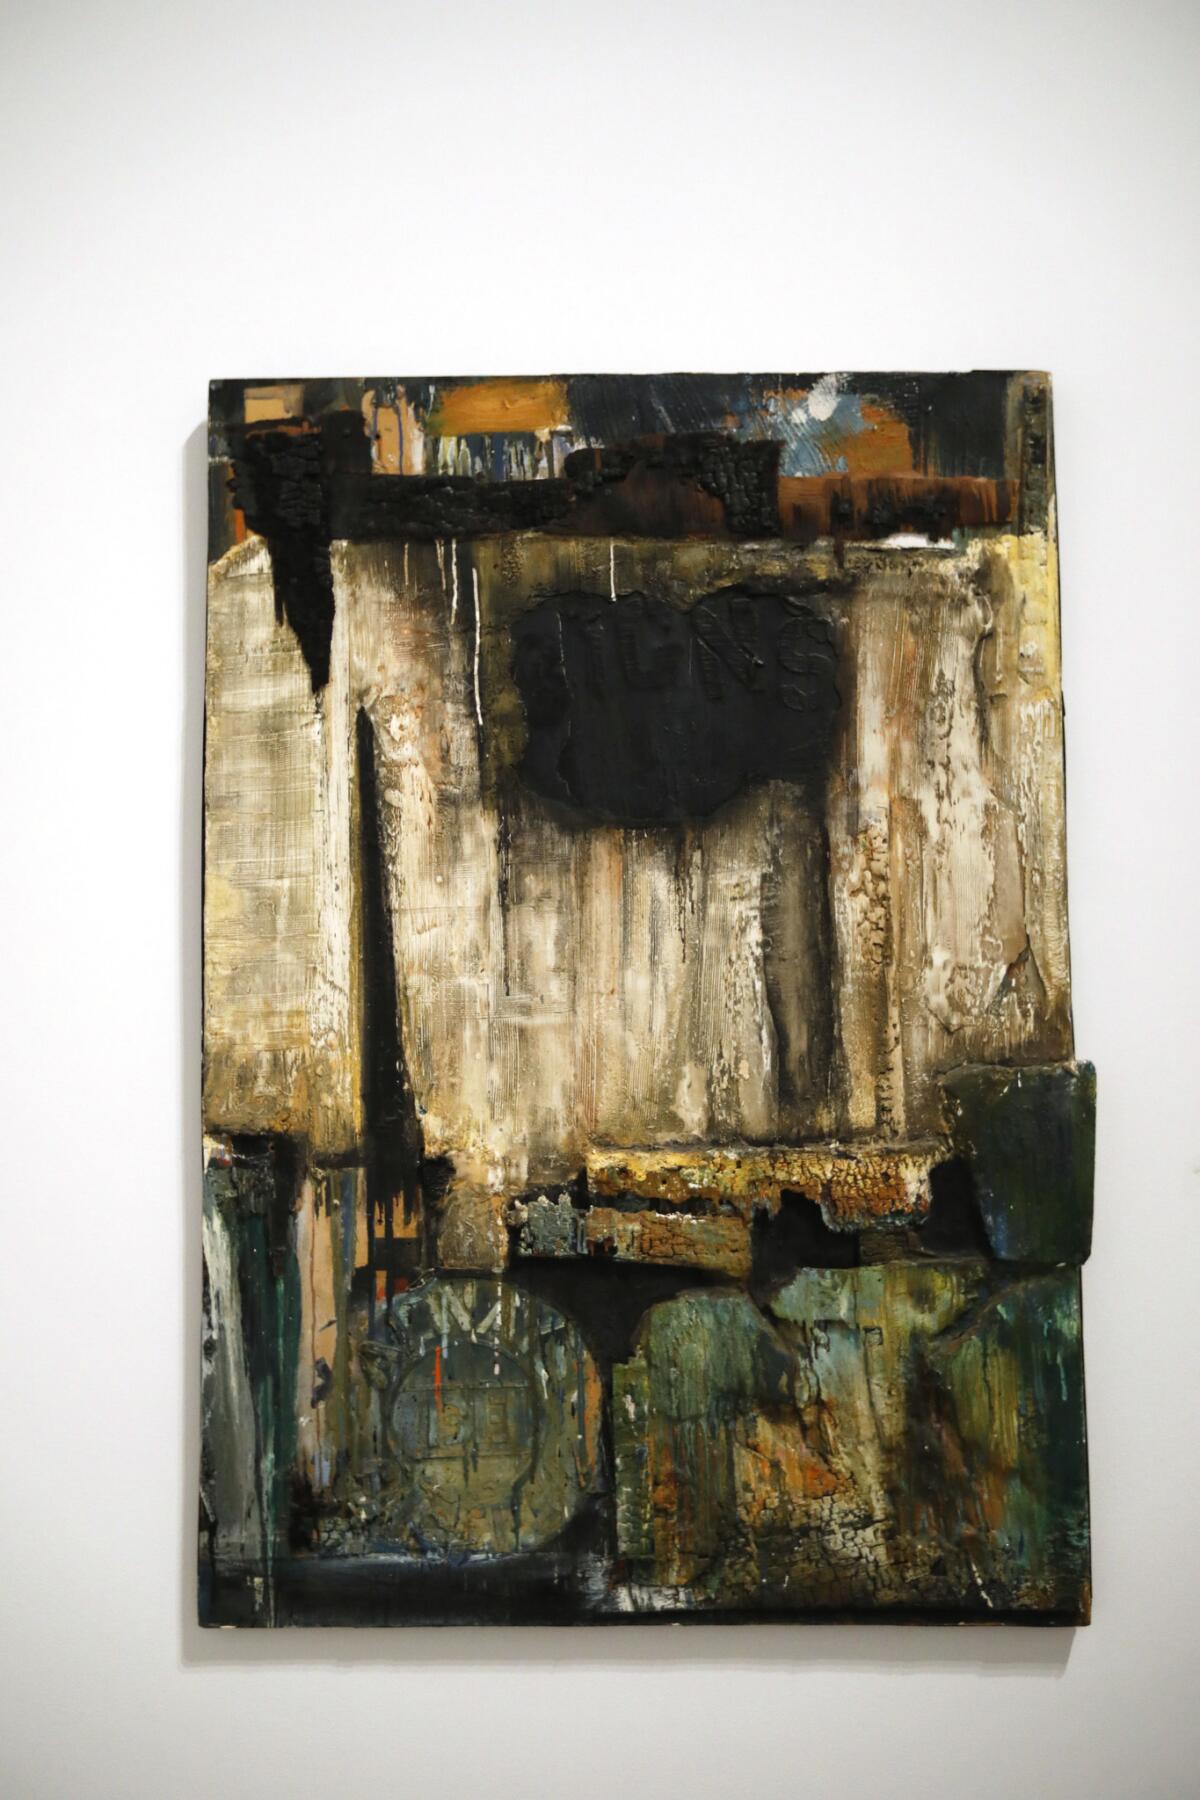 “Watts Riot” by Noah Purifoy is part of "Soul of a Nation: Art in the Age of Black Power 1963-1983" at the Broad.